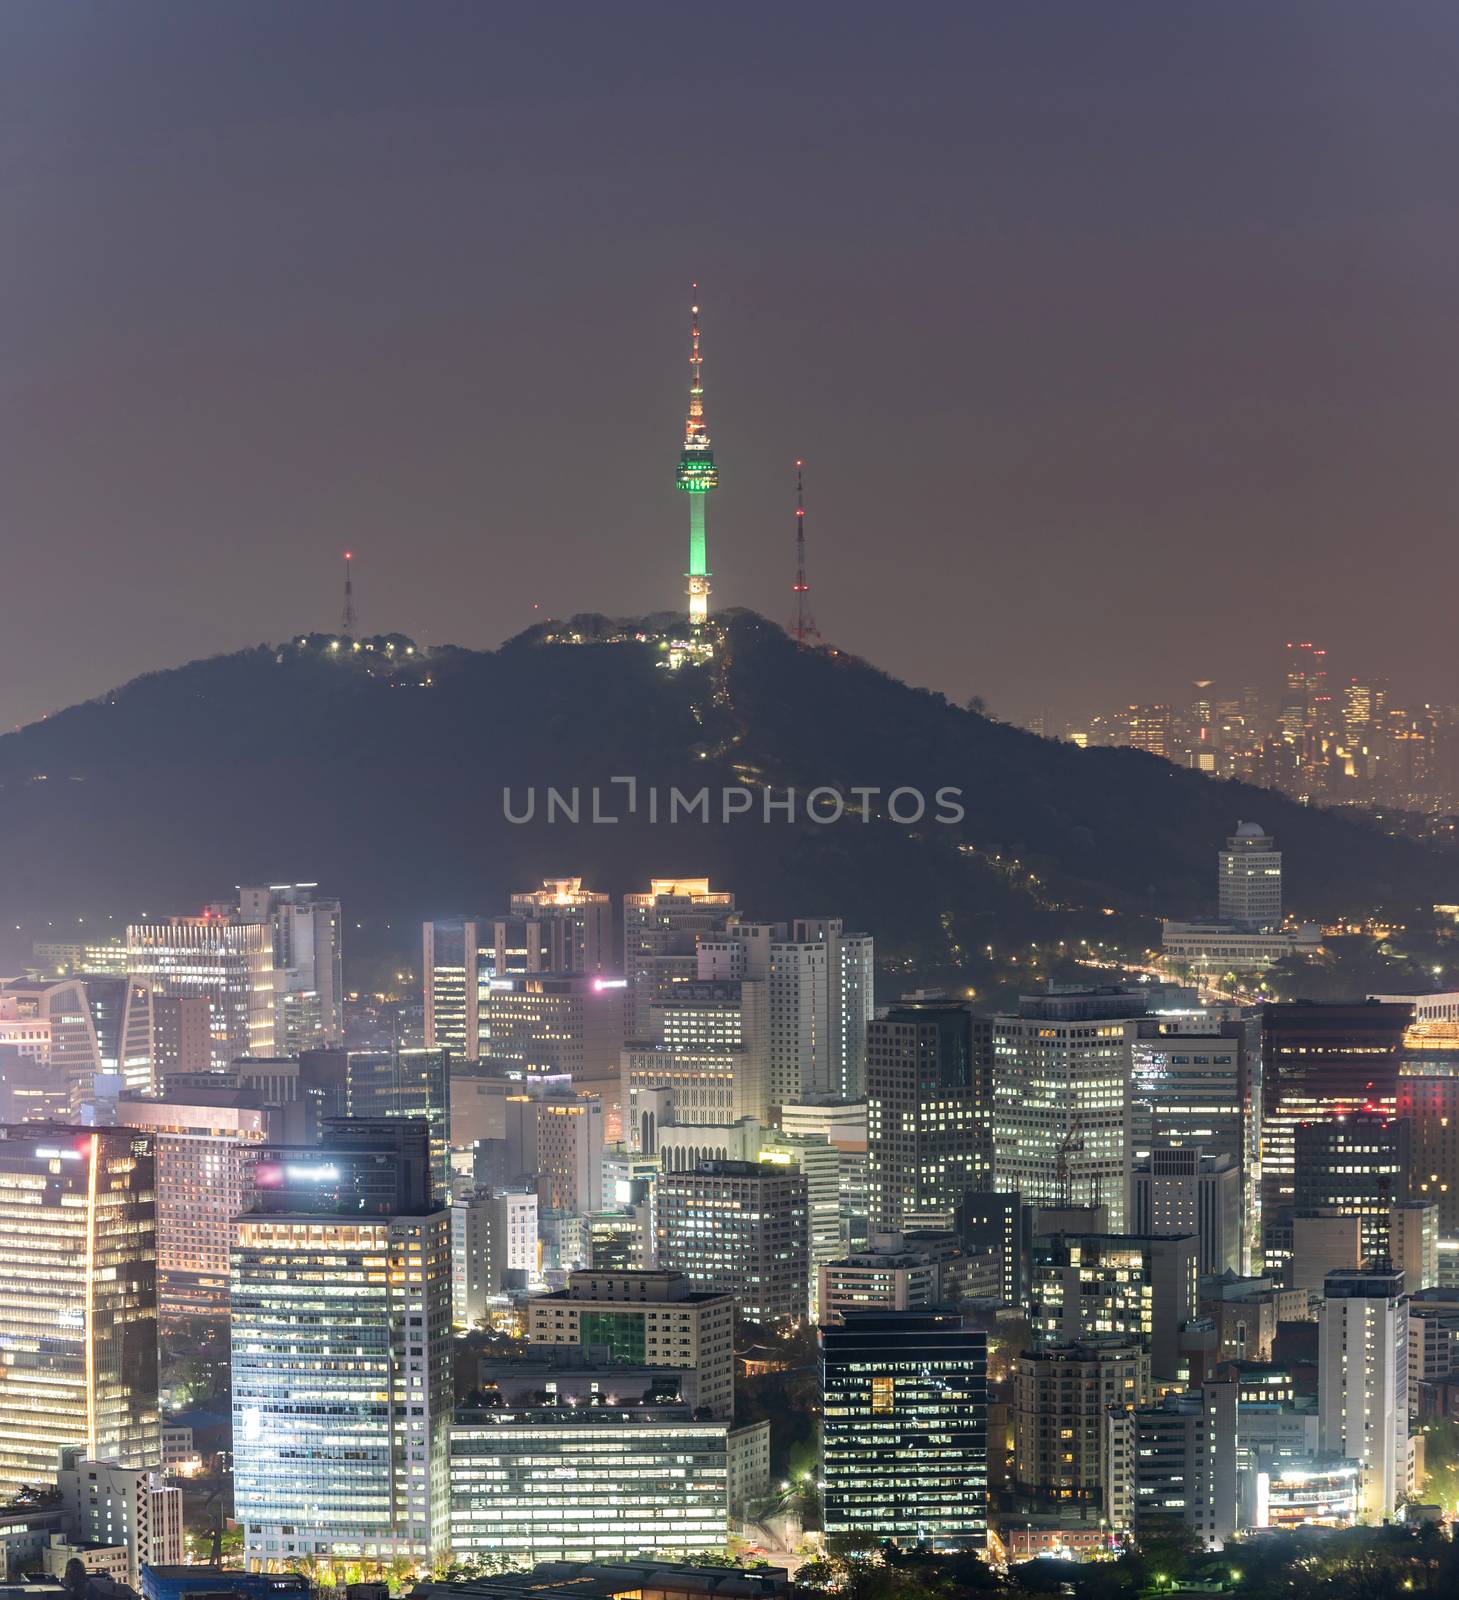 Night view of Seoul Downtown cityscape by vichie81